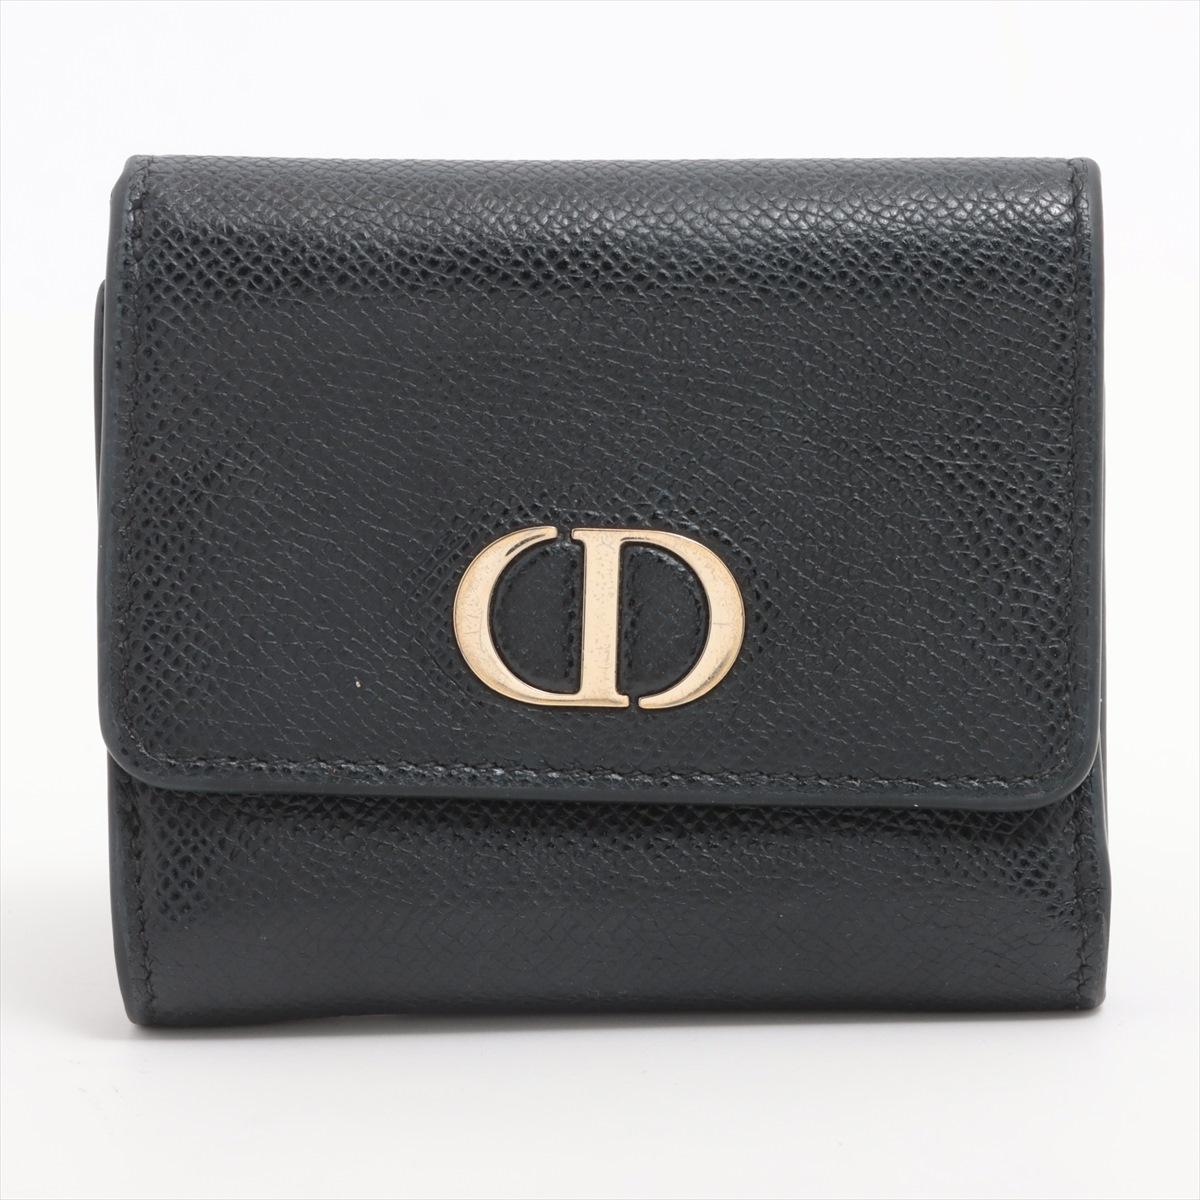 The Dior Montaigne Leather Trifold Wallet in Black is an elegant and sophisticated accessory that reflects Dior's timeless design. Crafted from smooth black leather, the wallet showcases a minimalist and refined aesthetic. The trifold design unfolds